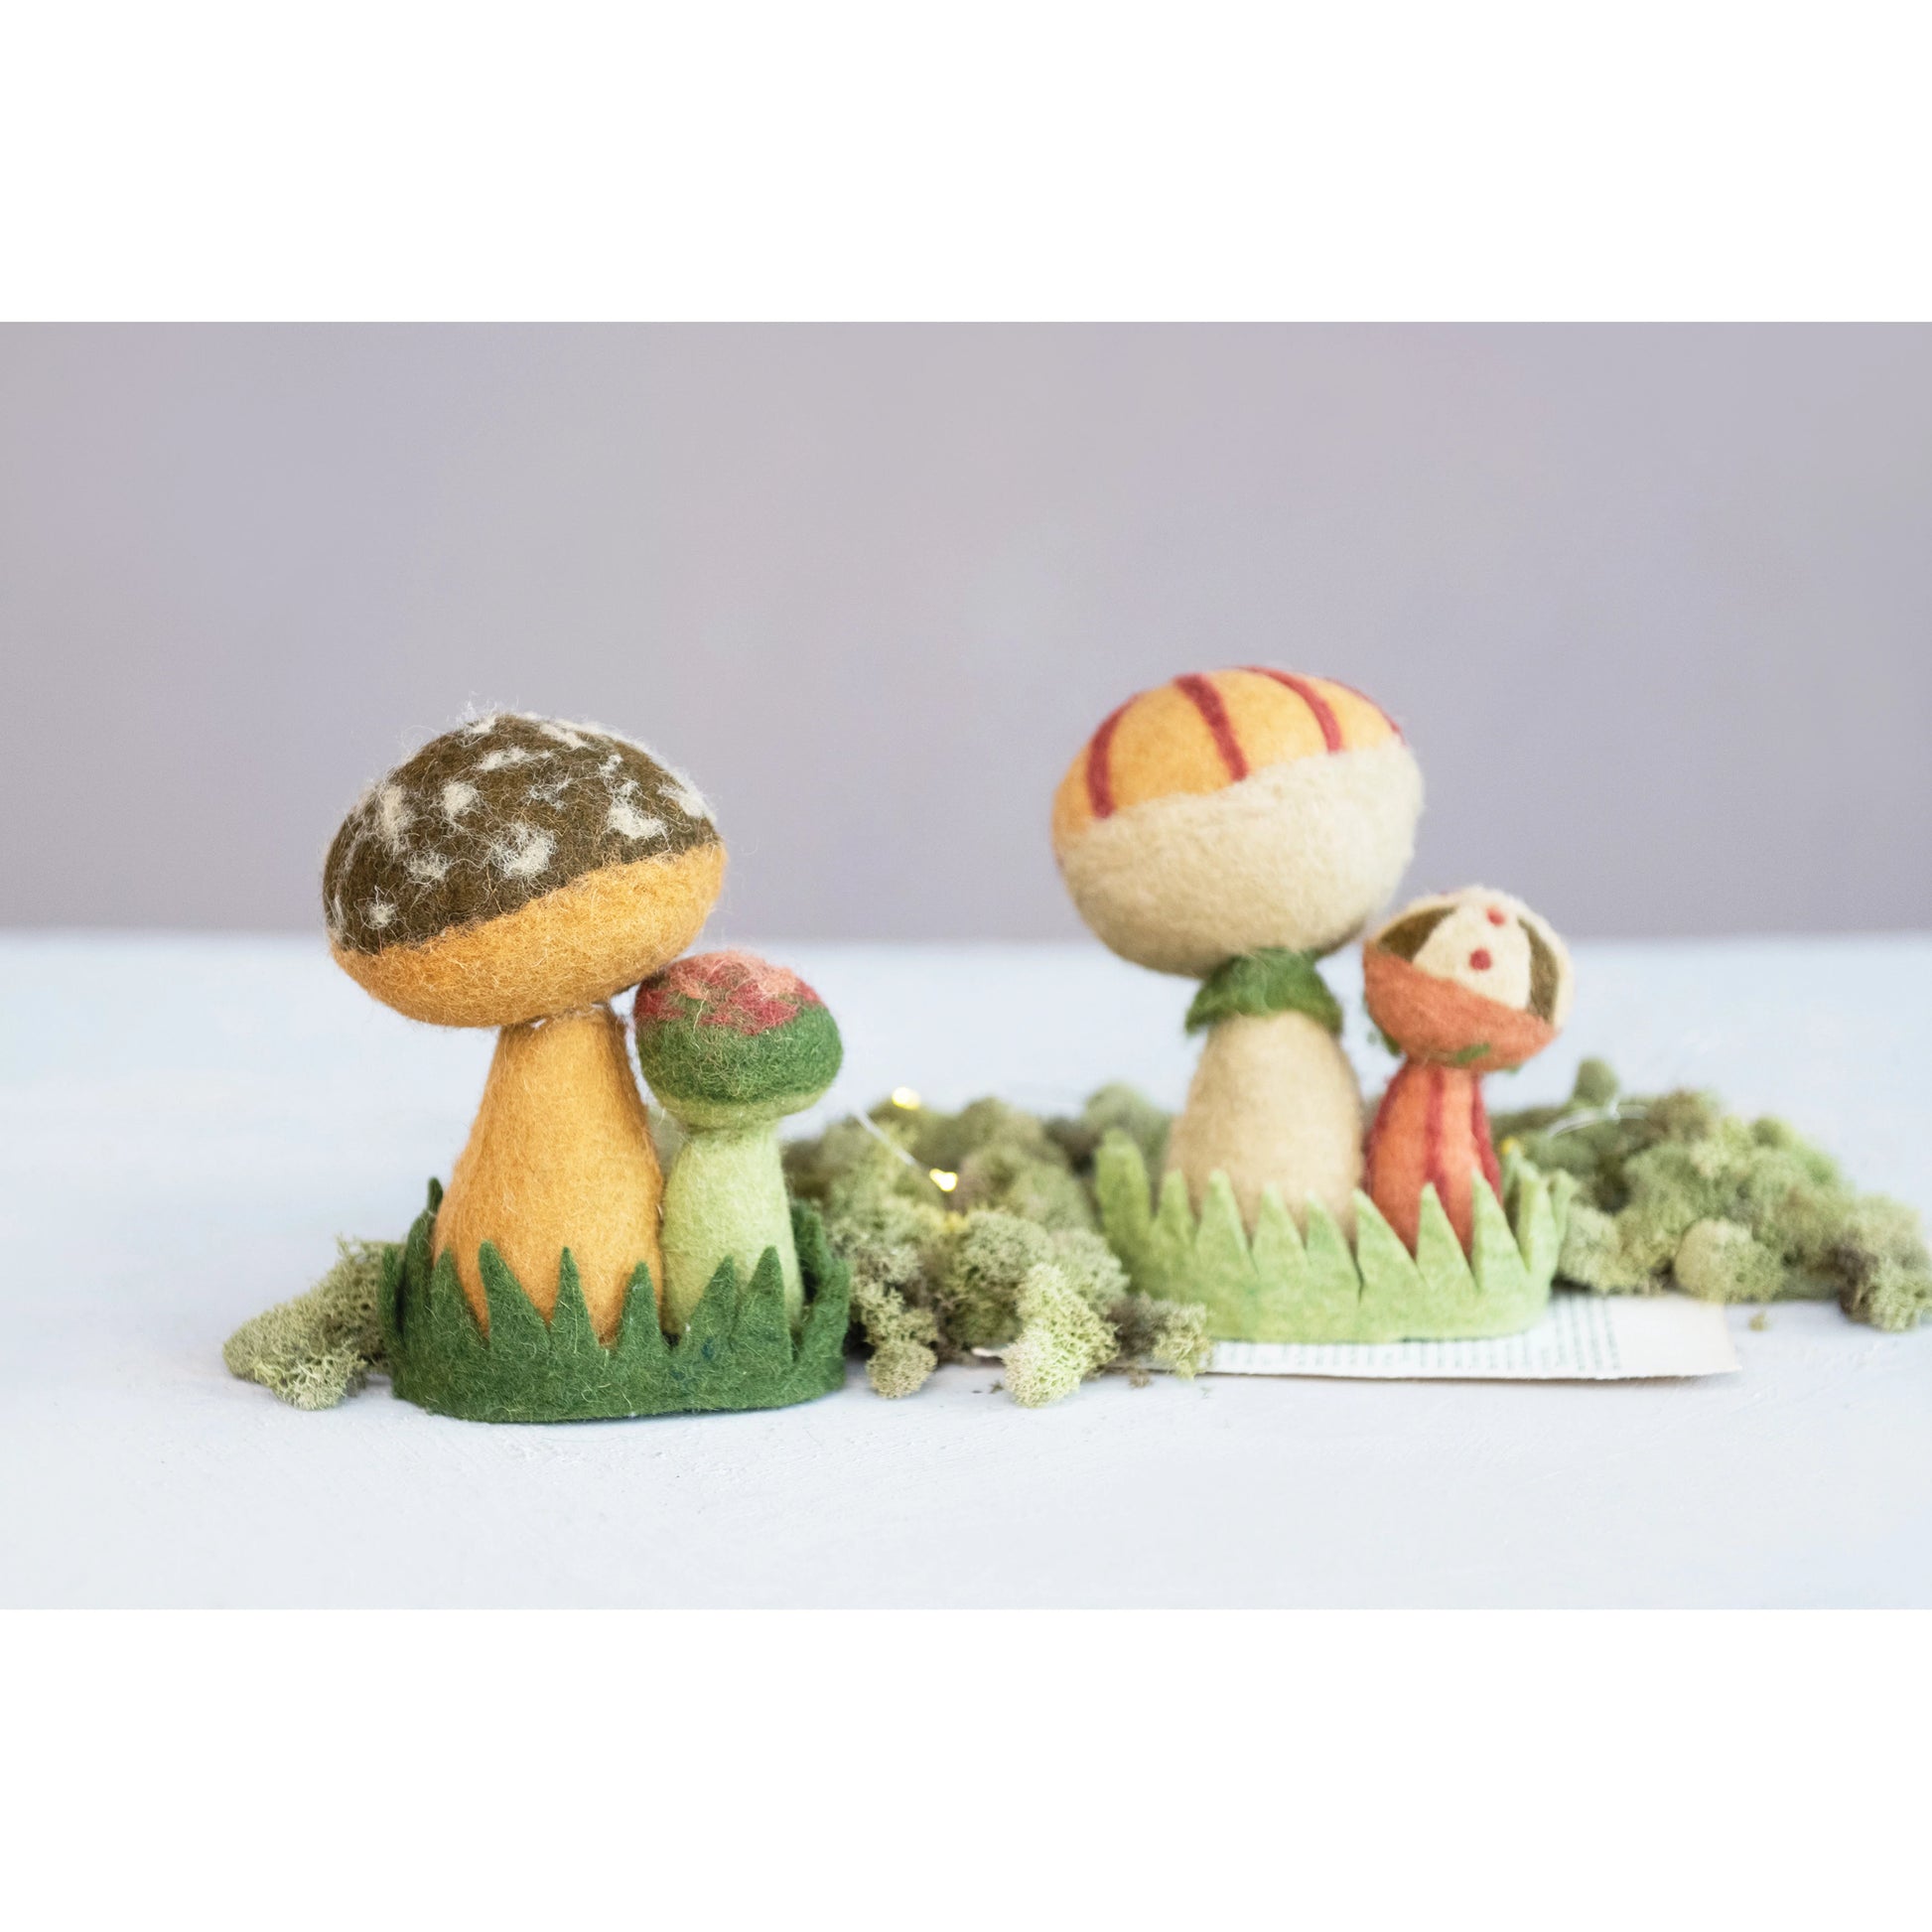 both styles of wool felt mushrooms displayed on a green surface surrounded by moss